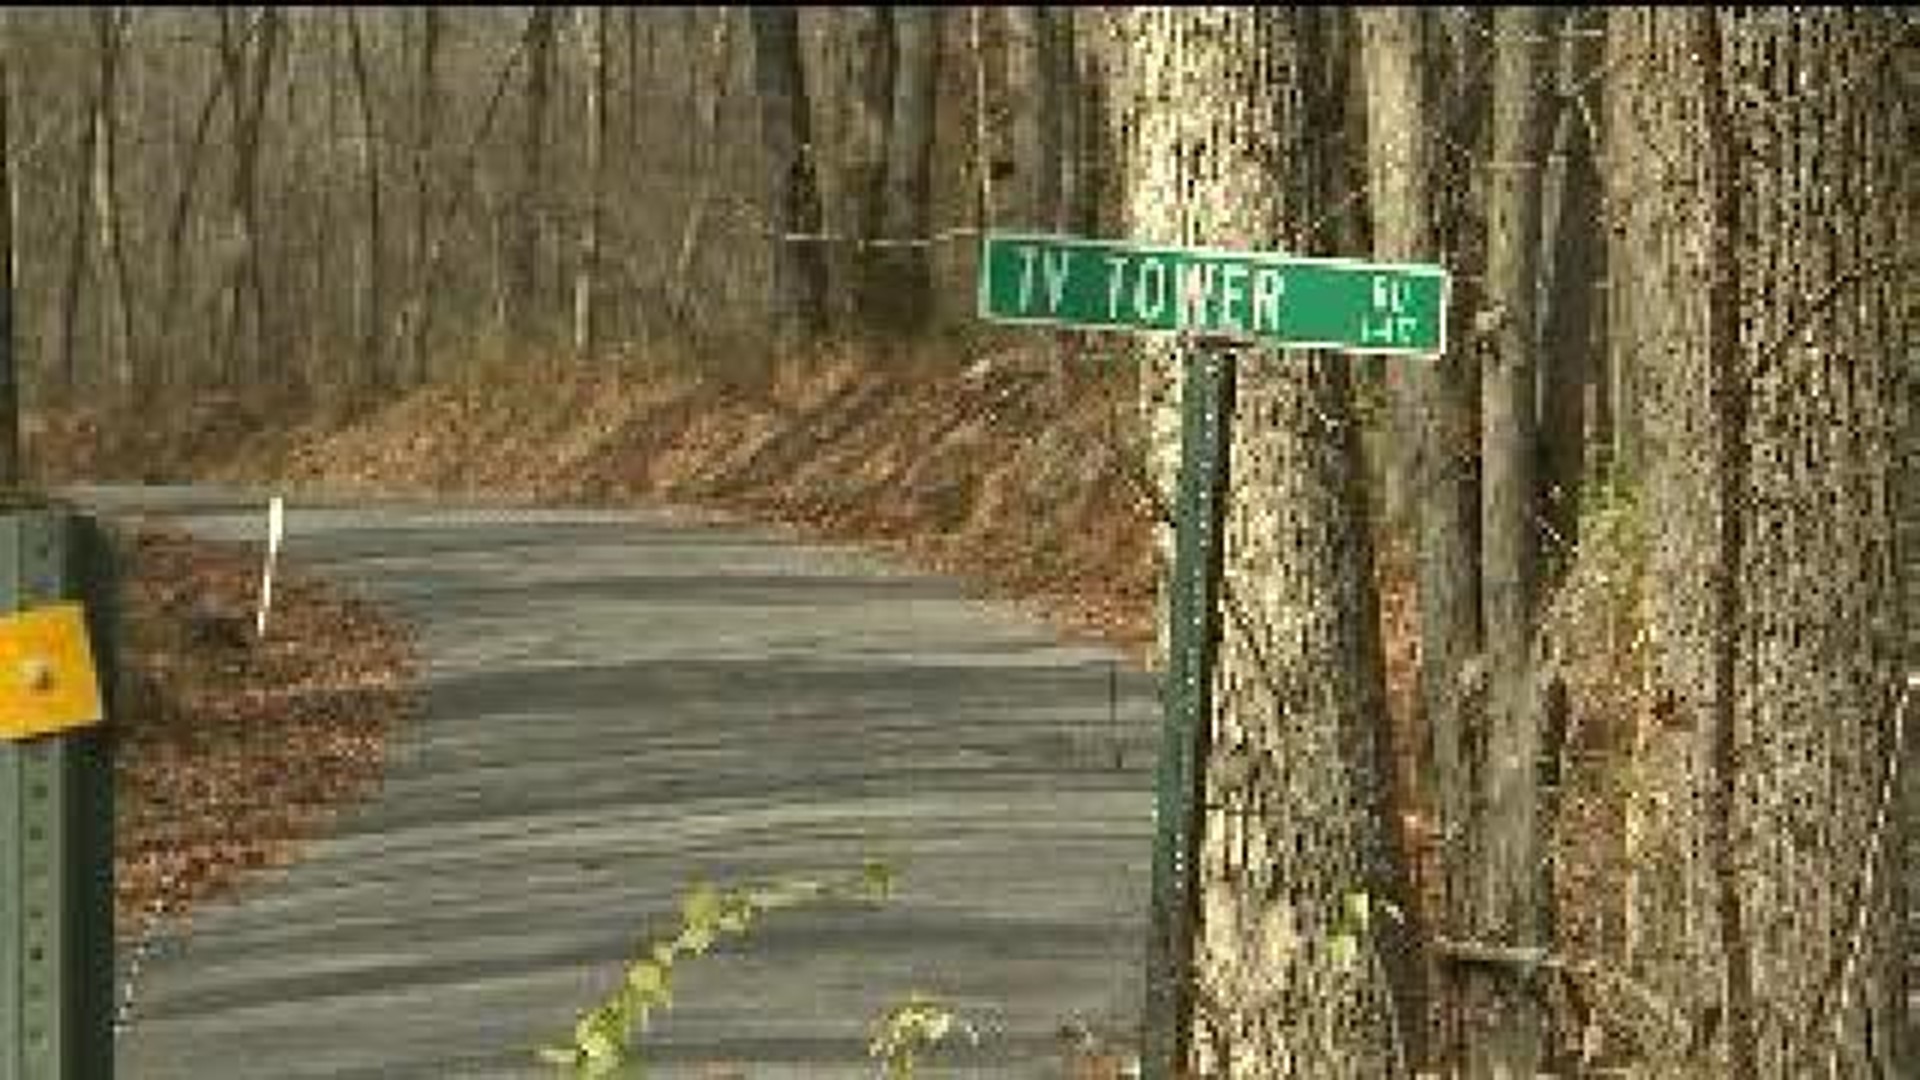 Missing Street Signs in Snyder County